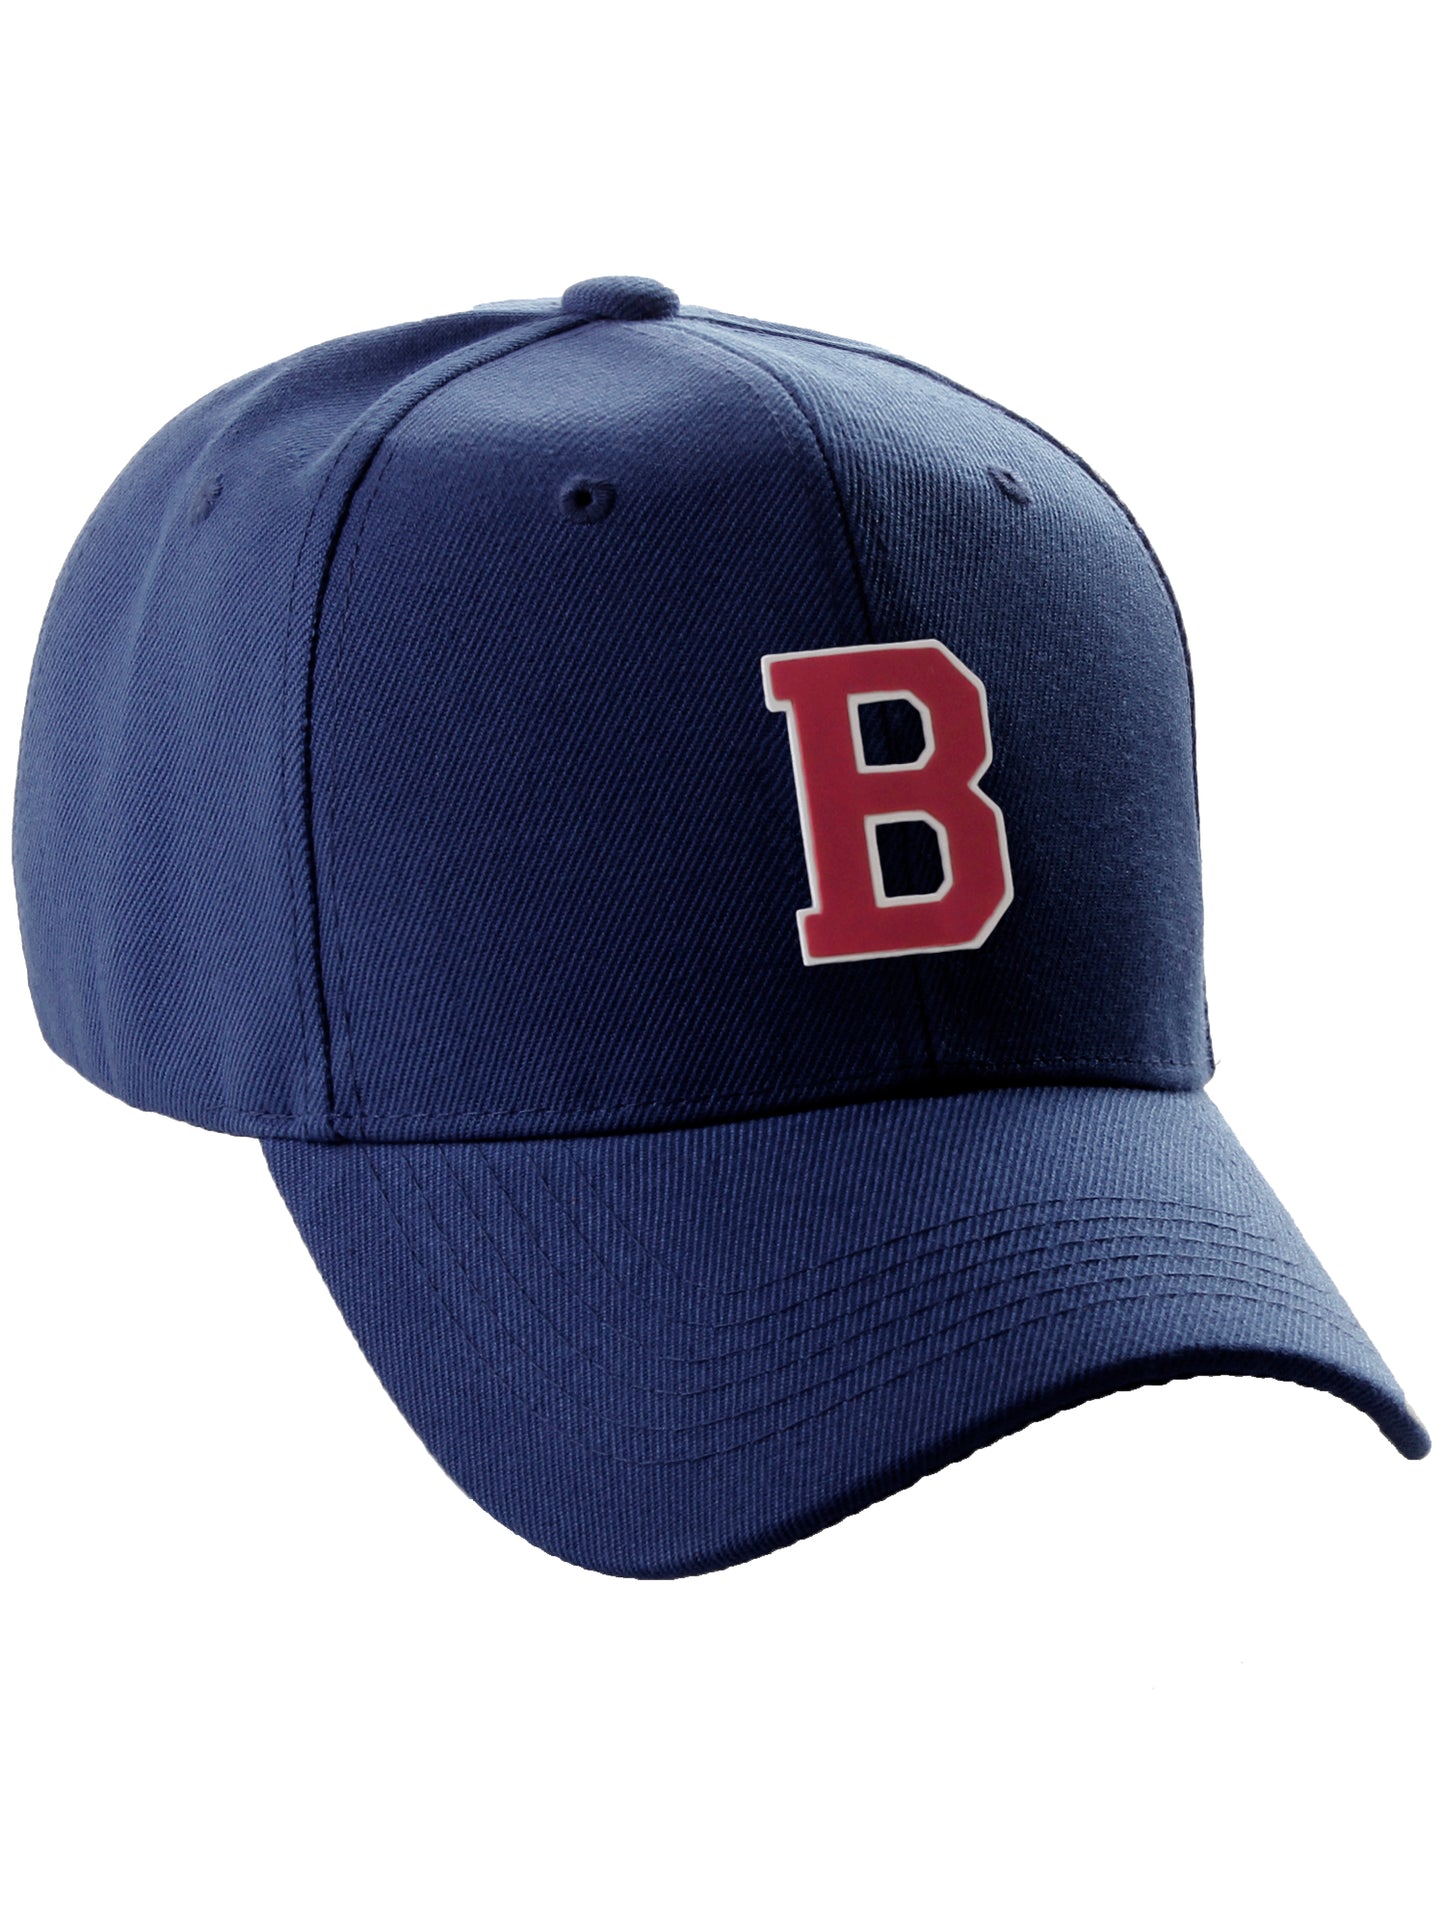 Classic Baseball Hat Custom A to Z Initial Team Letter, Navy Cap White Red